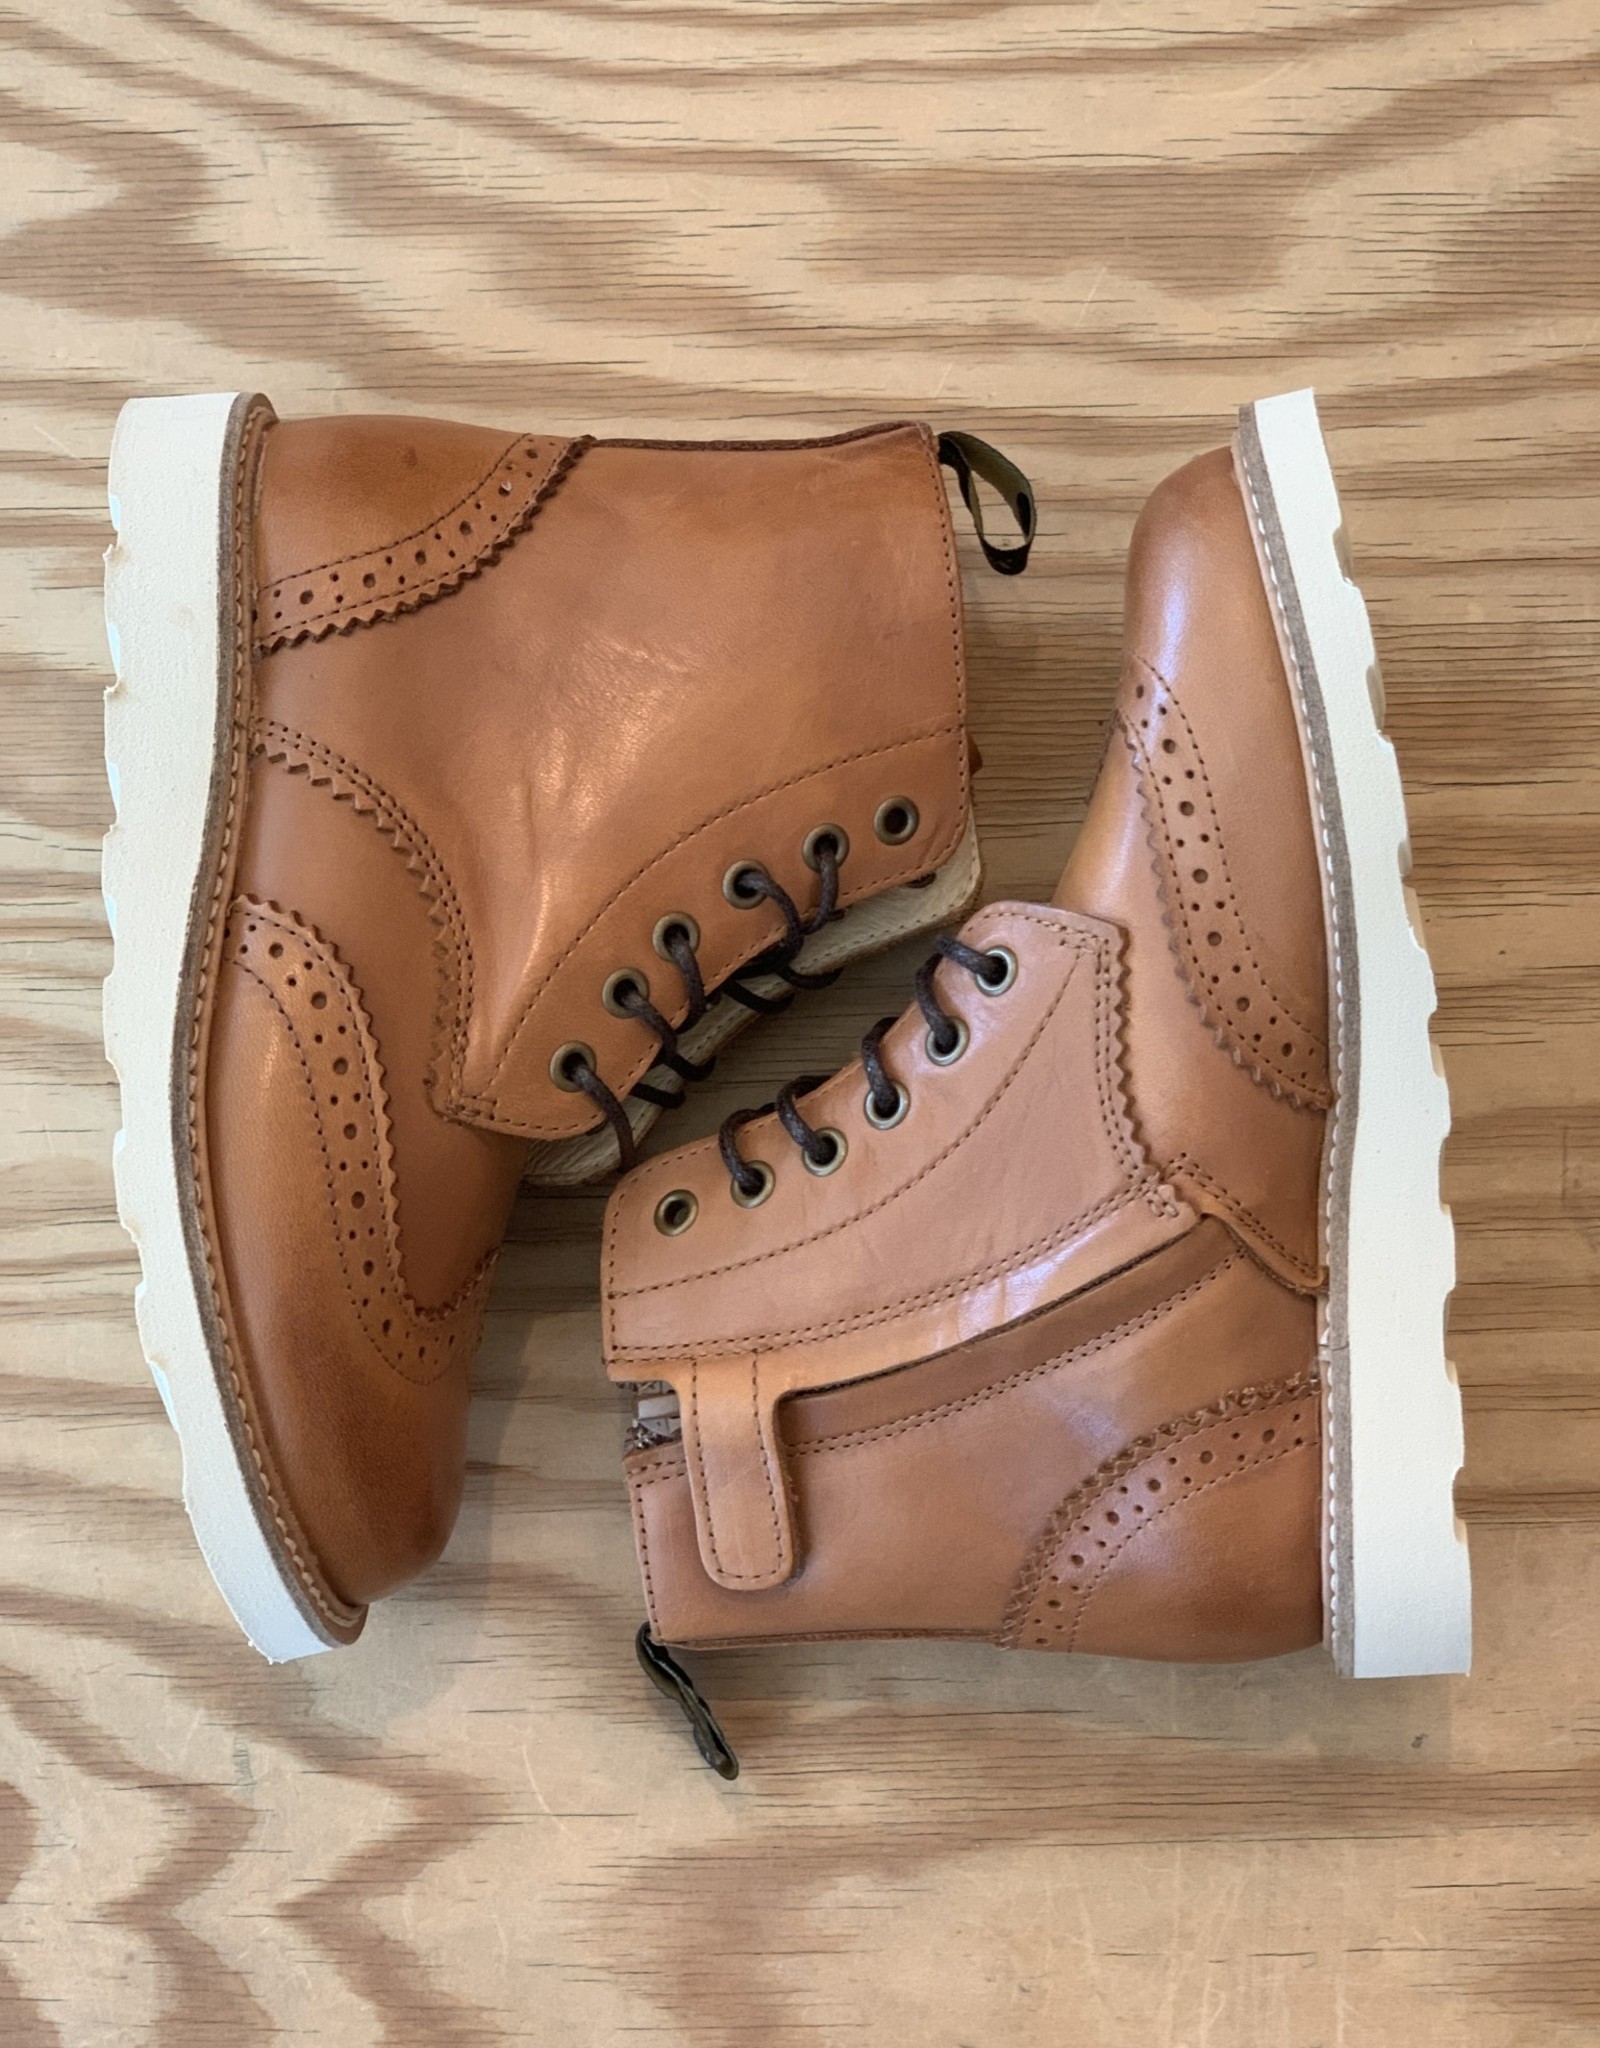 YOUNG SOLES YOUNG SOLES SIDNEY BROGUES TAN BURNISHED